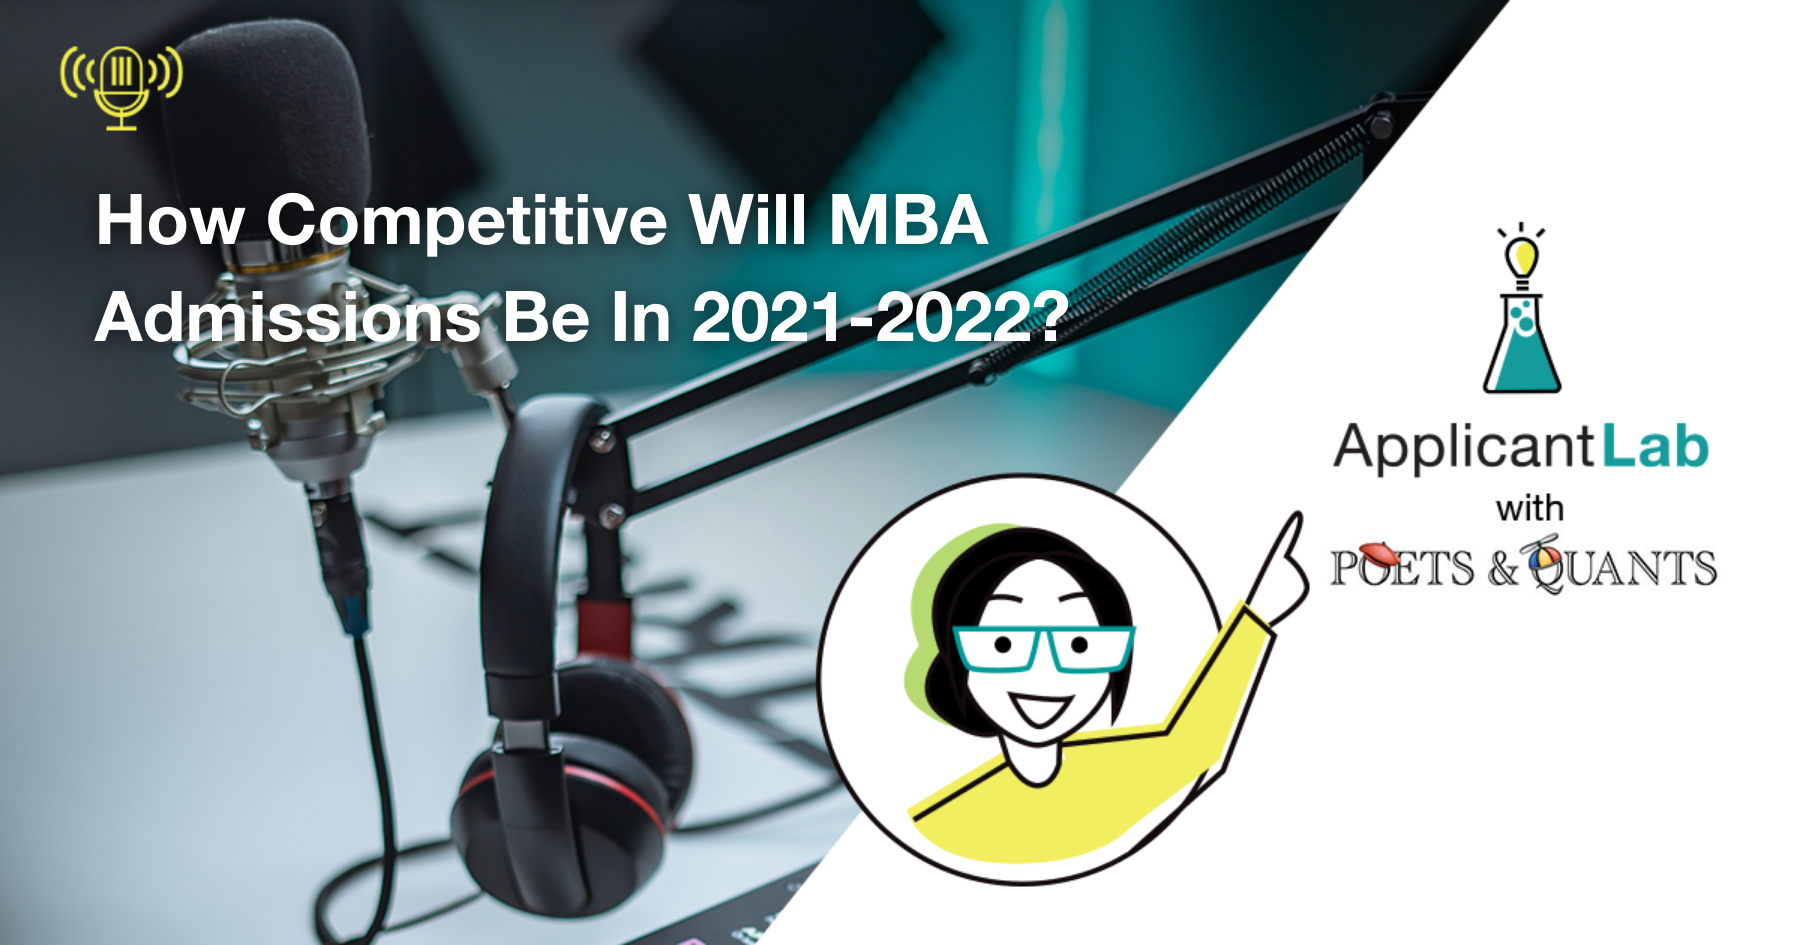 How Competitive Will MBA Admissions Be In 2021-2022?